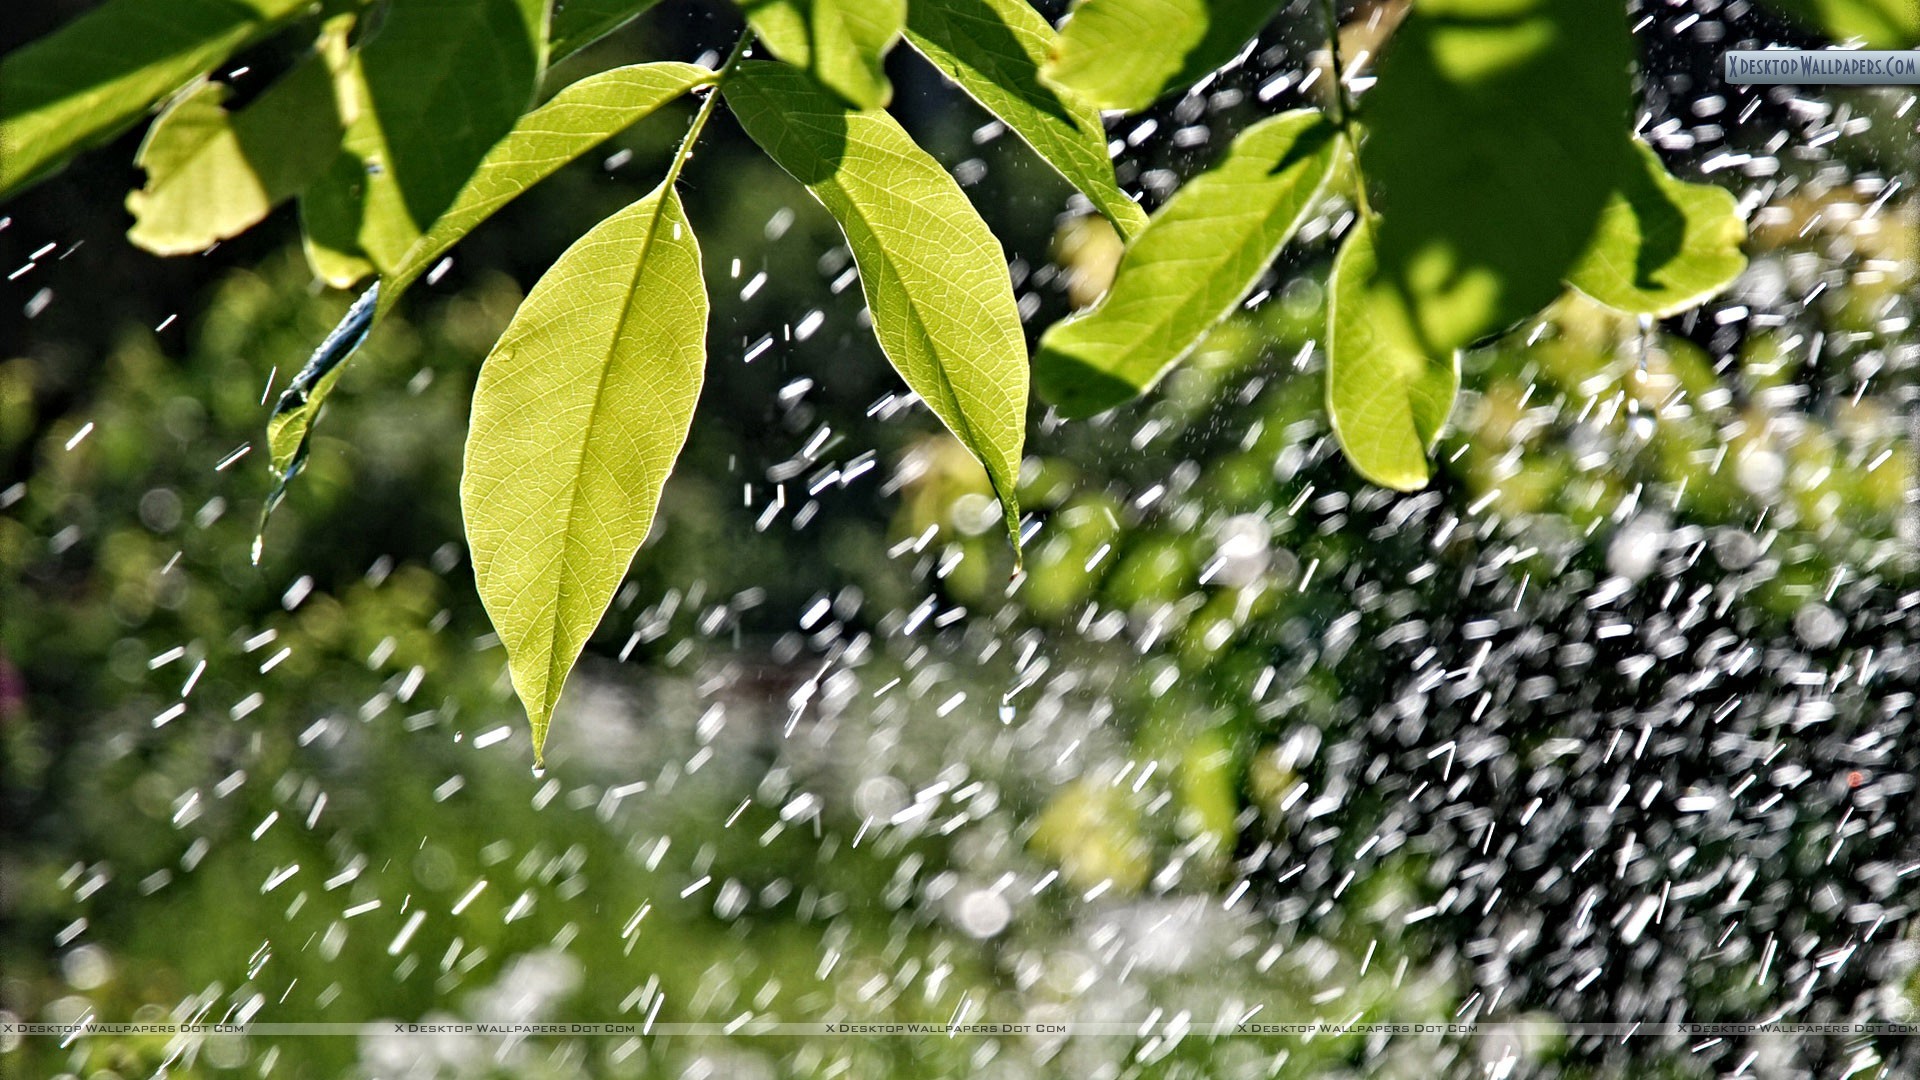 1920x1080 You are viewing wallpaper titled "Rain And Green Leaves" ...